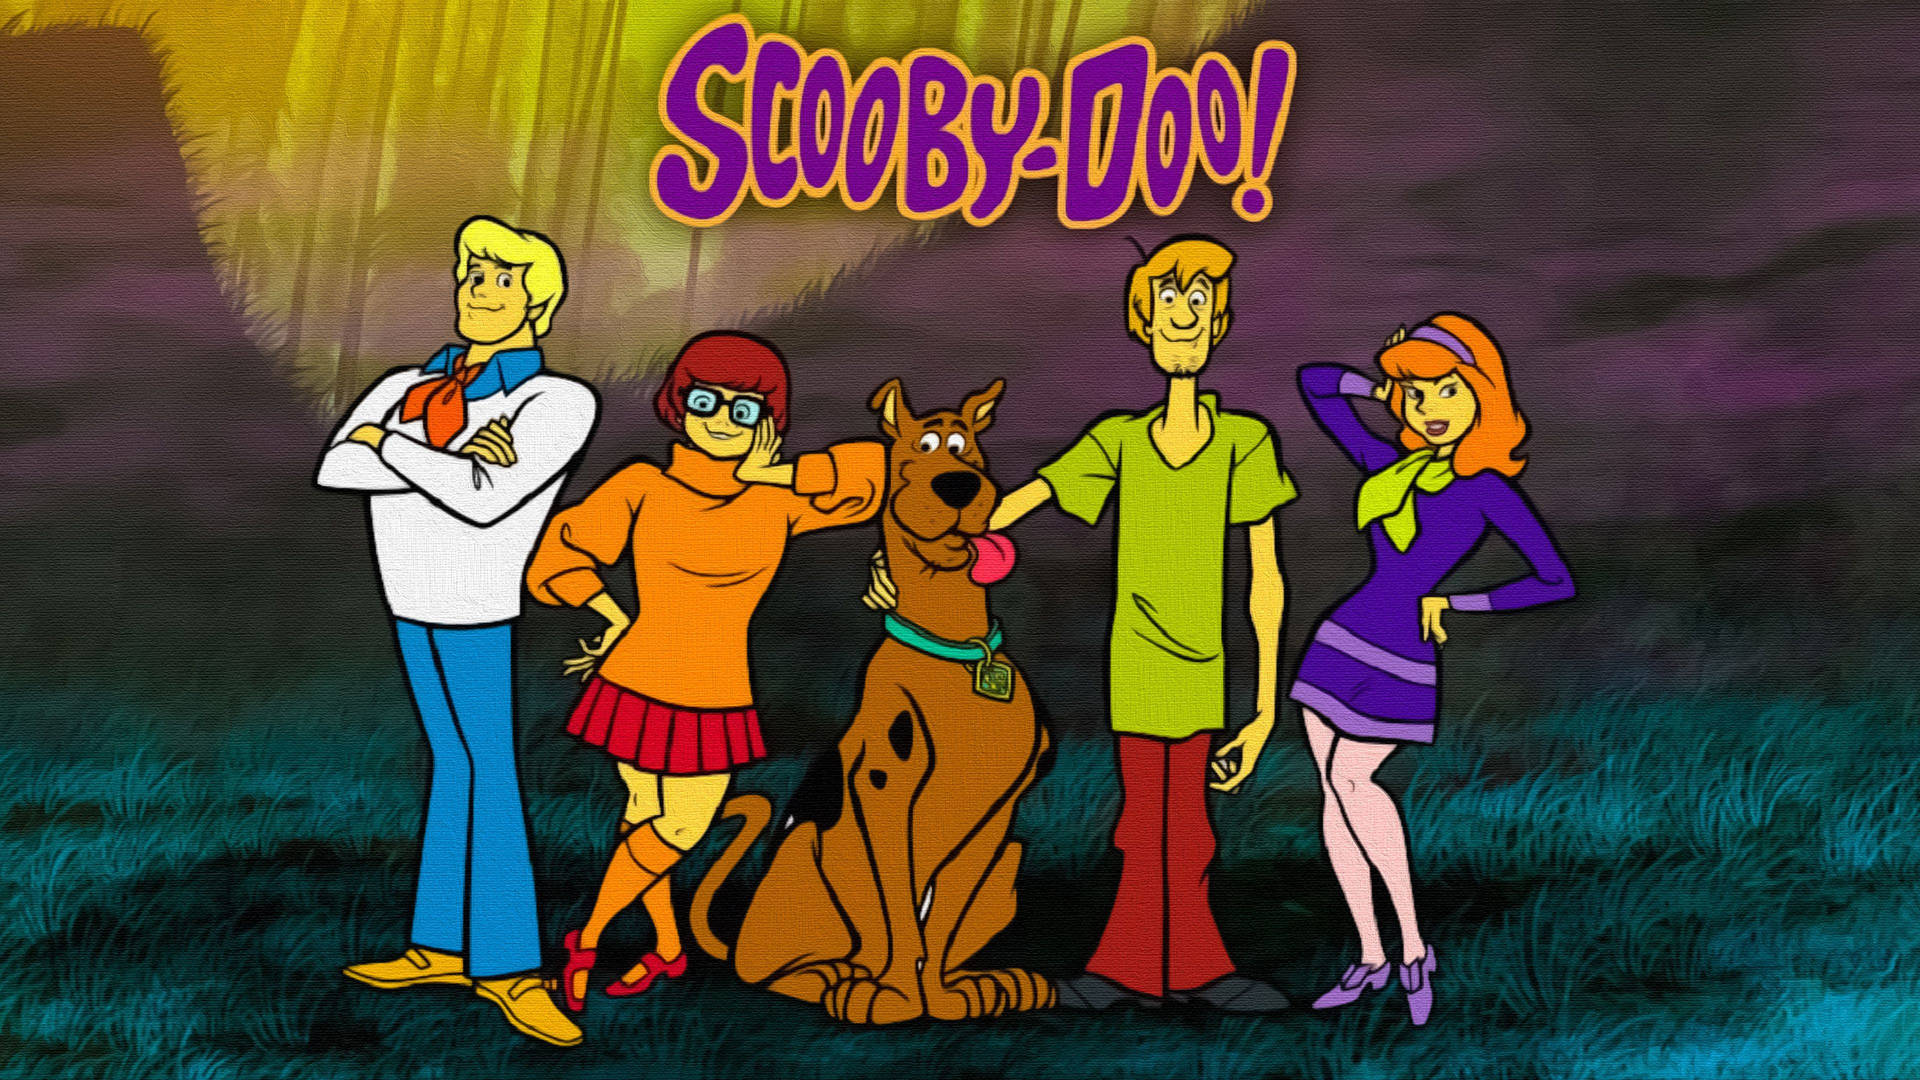 Free Scooby Doo Wallpaper Downloads, [100+] Scooby Doo Wallpapers for FREE  